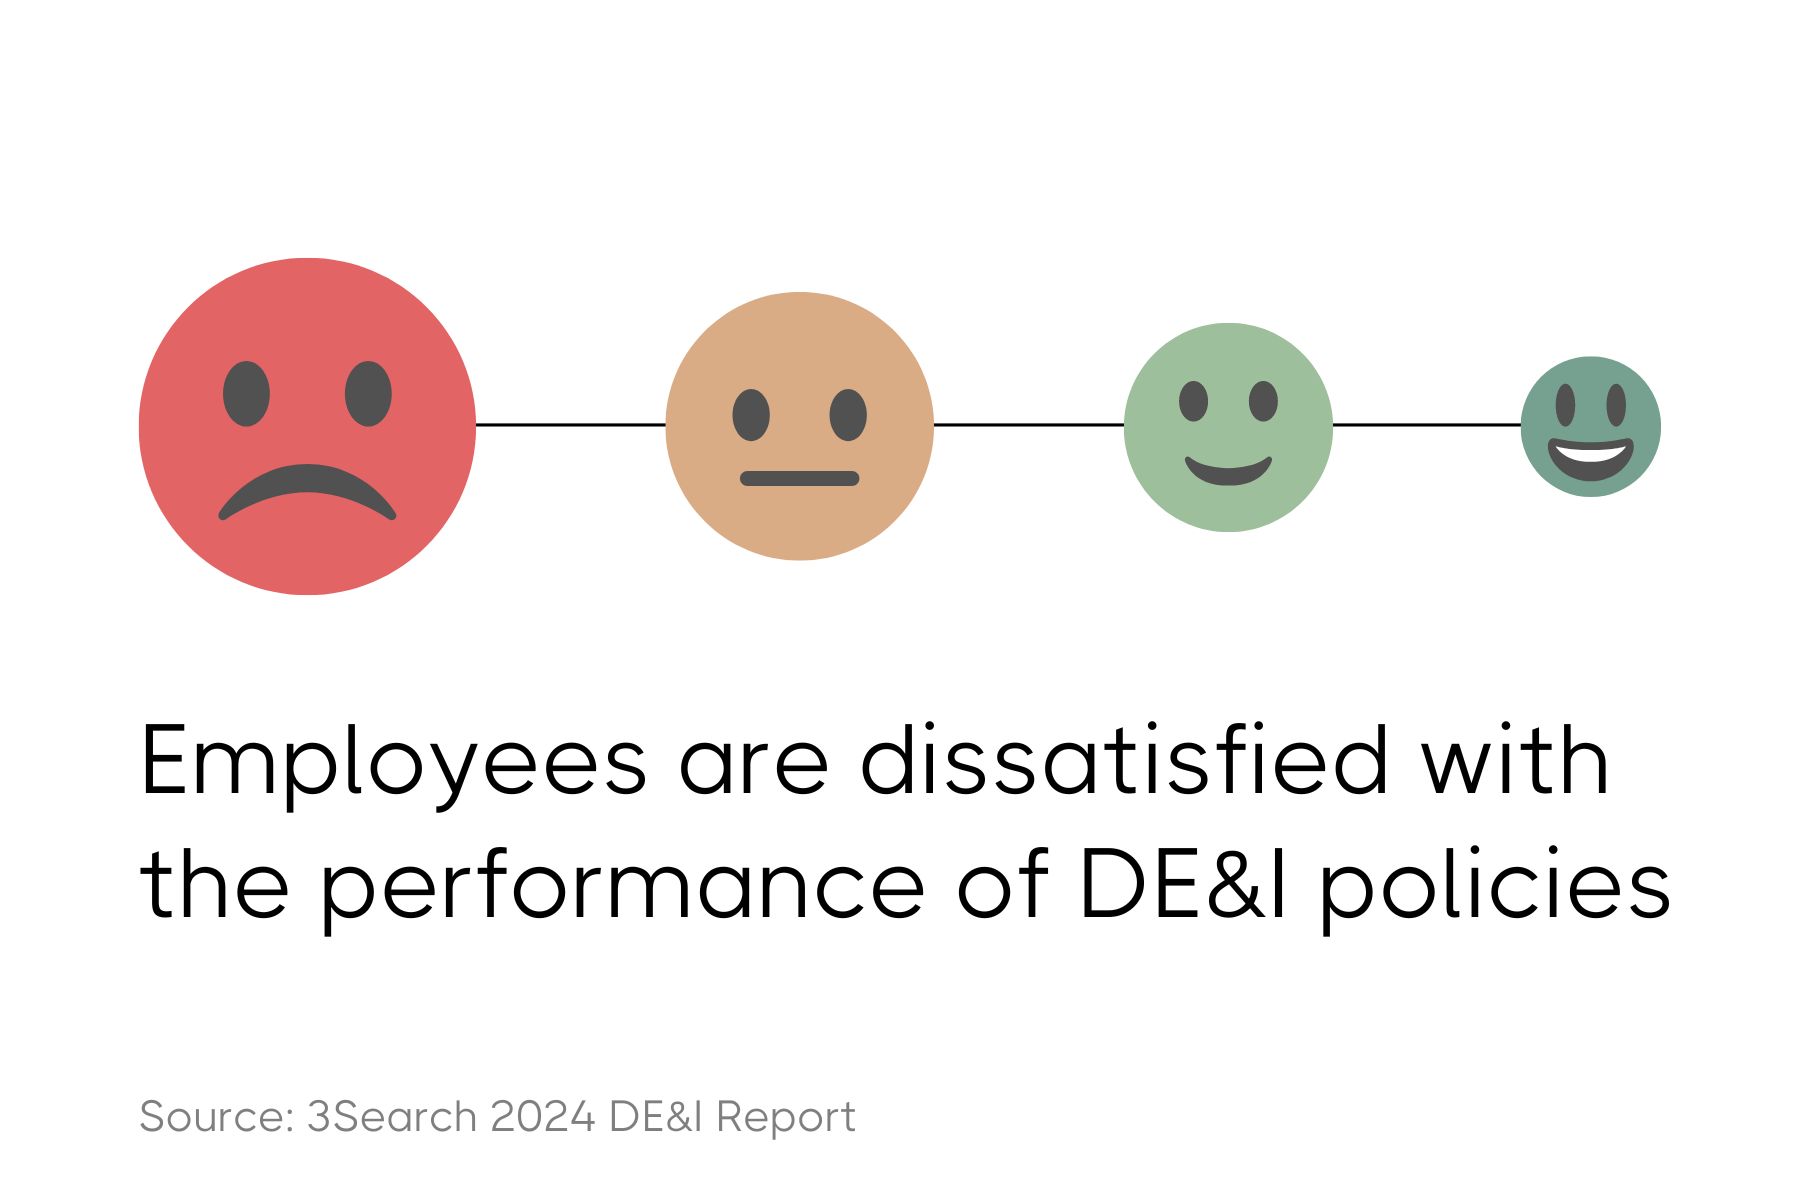 A graphic with a line of four emoticons representing a spectrum of employee satisfaction. The first is a red, unhappy face, followed by a neutral beige face, then a light green face with a slight smile, and finally, a dark green face with a big grin. Below the emoticons is the text 'Employees are dissatisfied with the performance of DE&I policies'. The source is cited at the bottom as '3Search 2024 DE&I Report'.